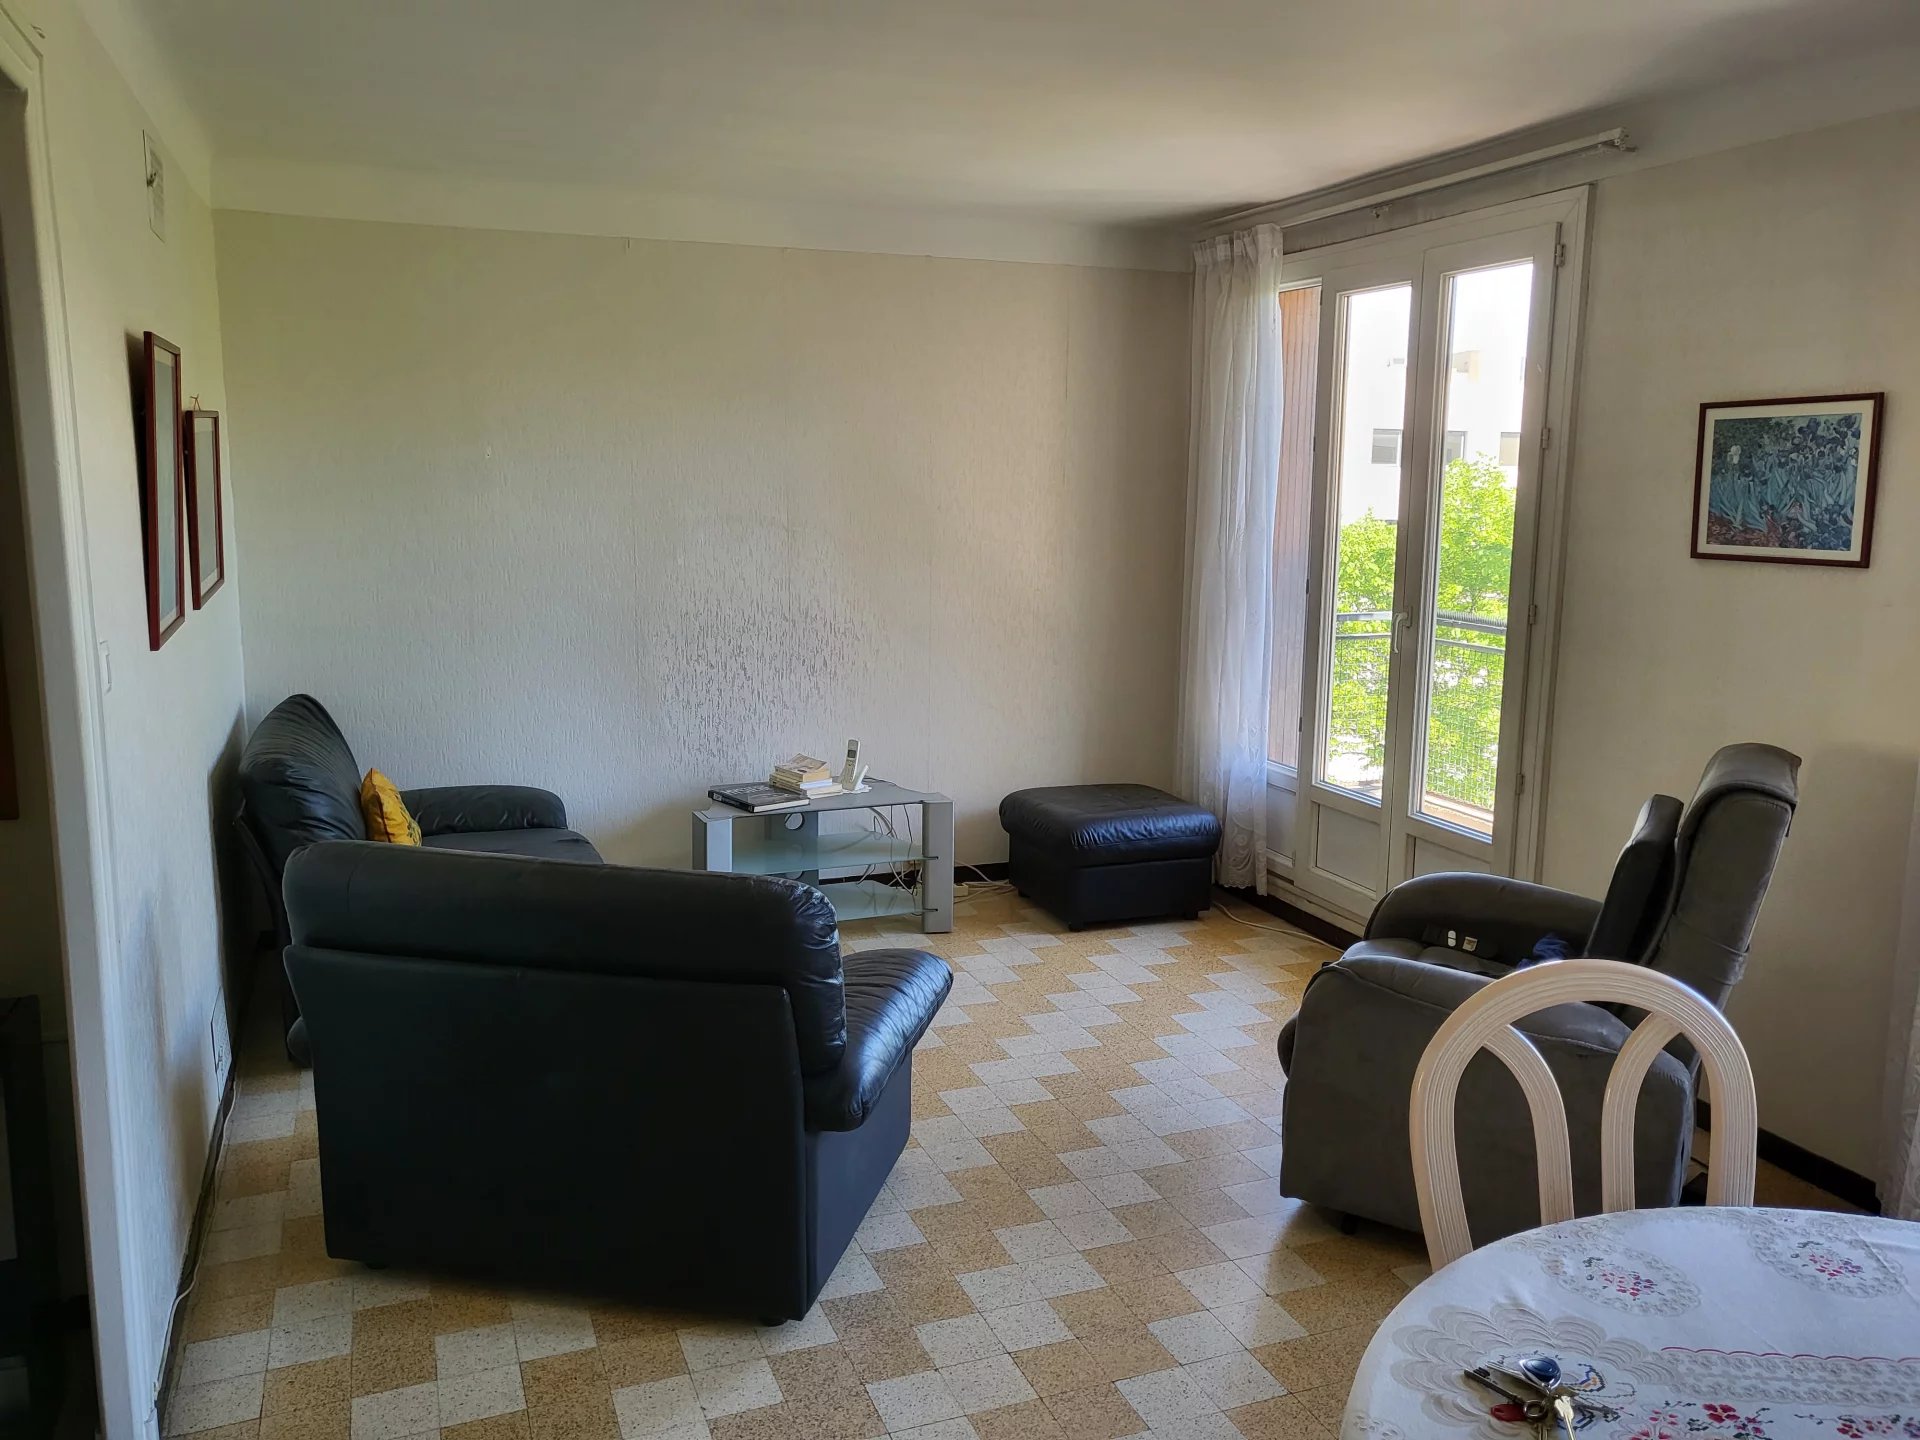 Appartement type 4, 75.18m², 3 chambres, balcon cave